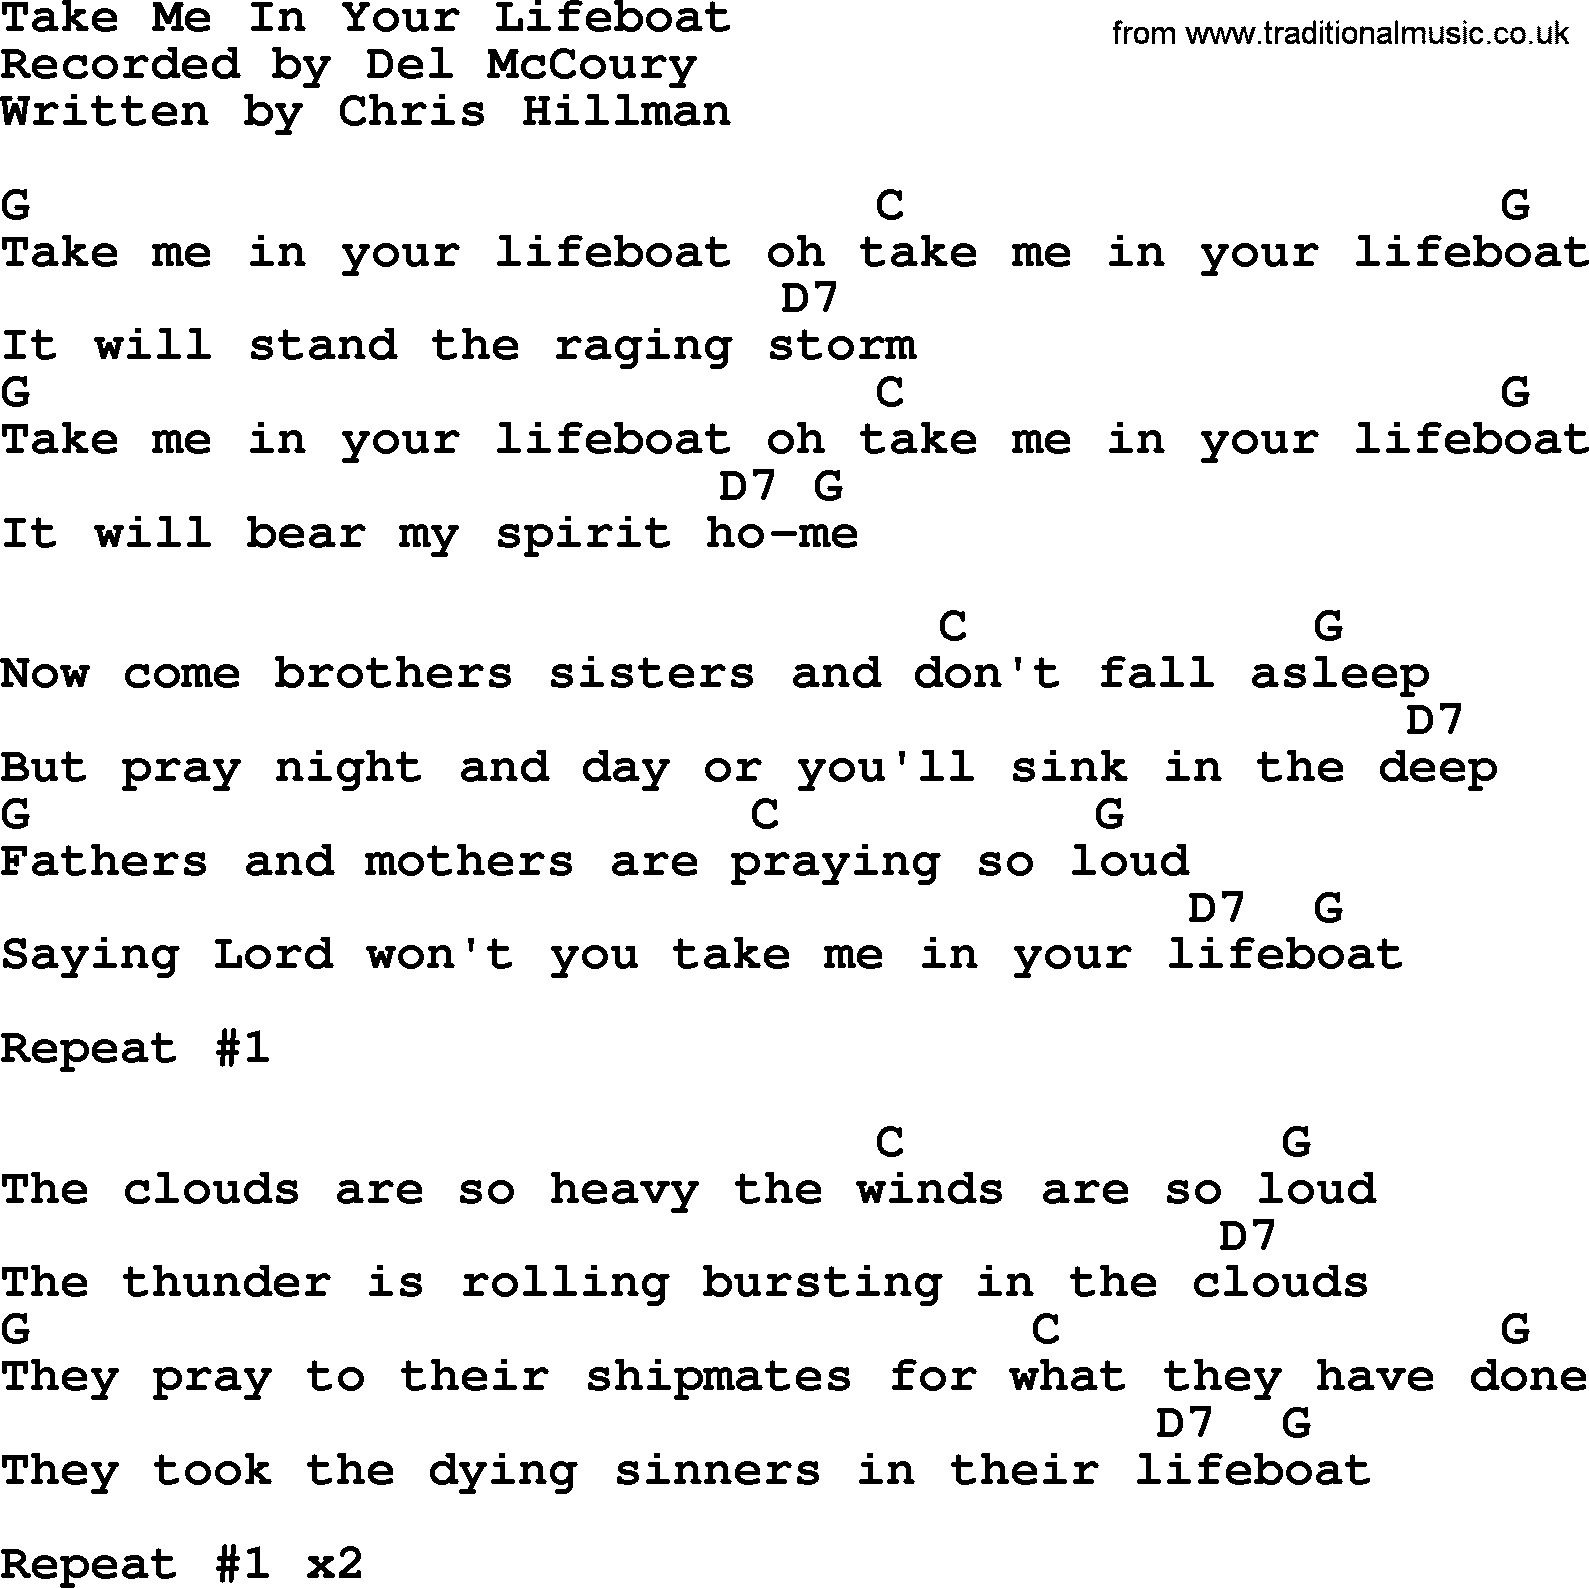 Bluegrass song: Take Me In Your Lifeboat, lyrics and chords